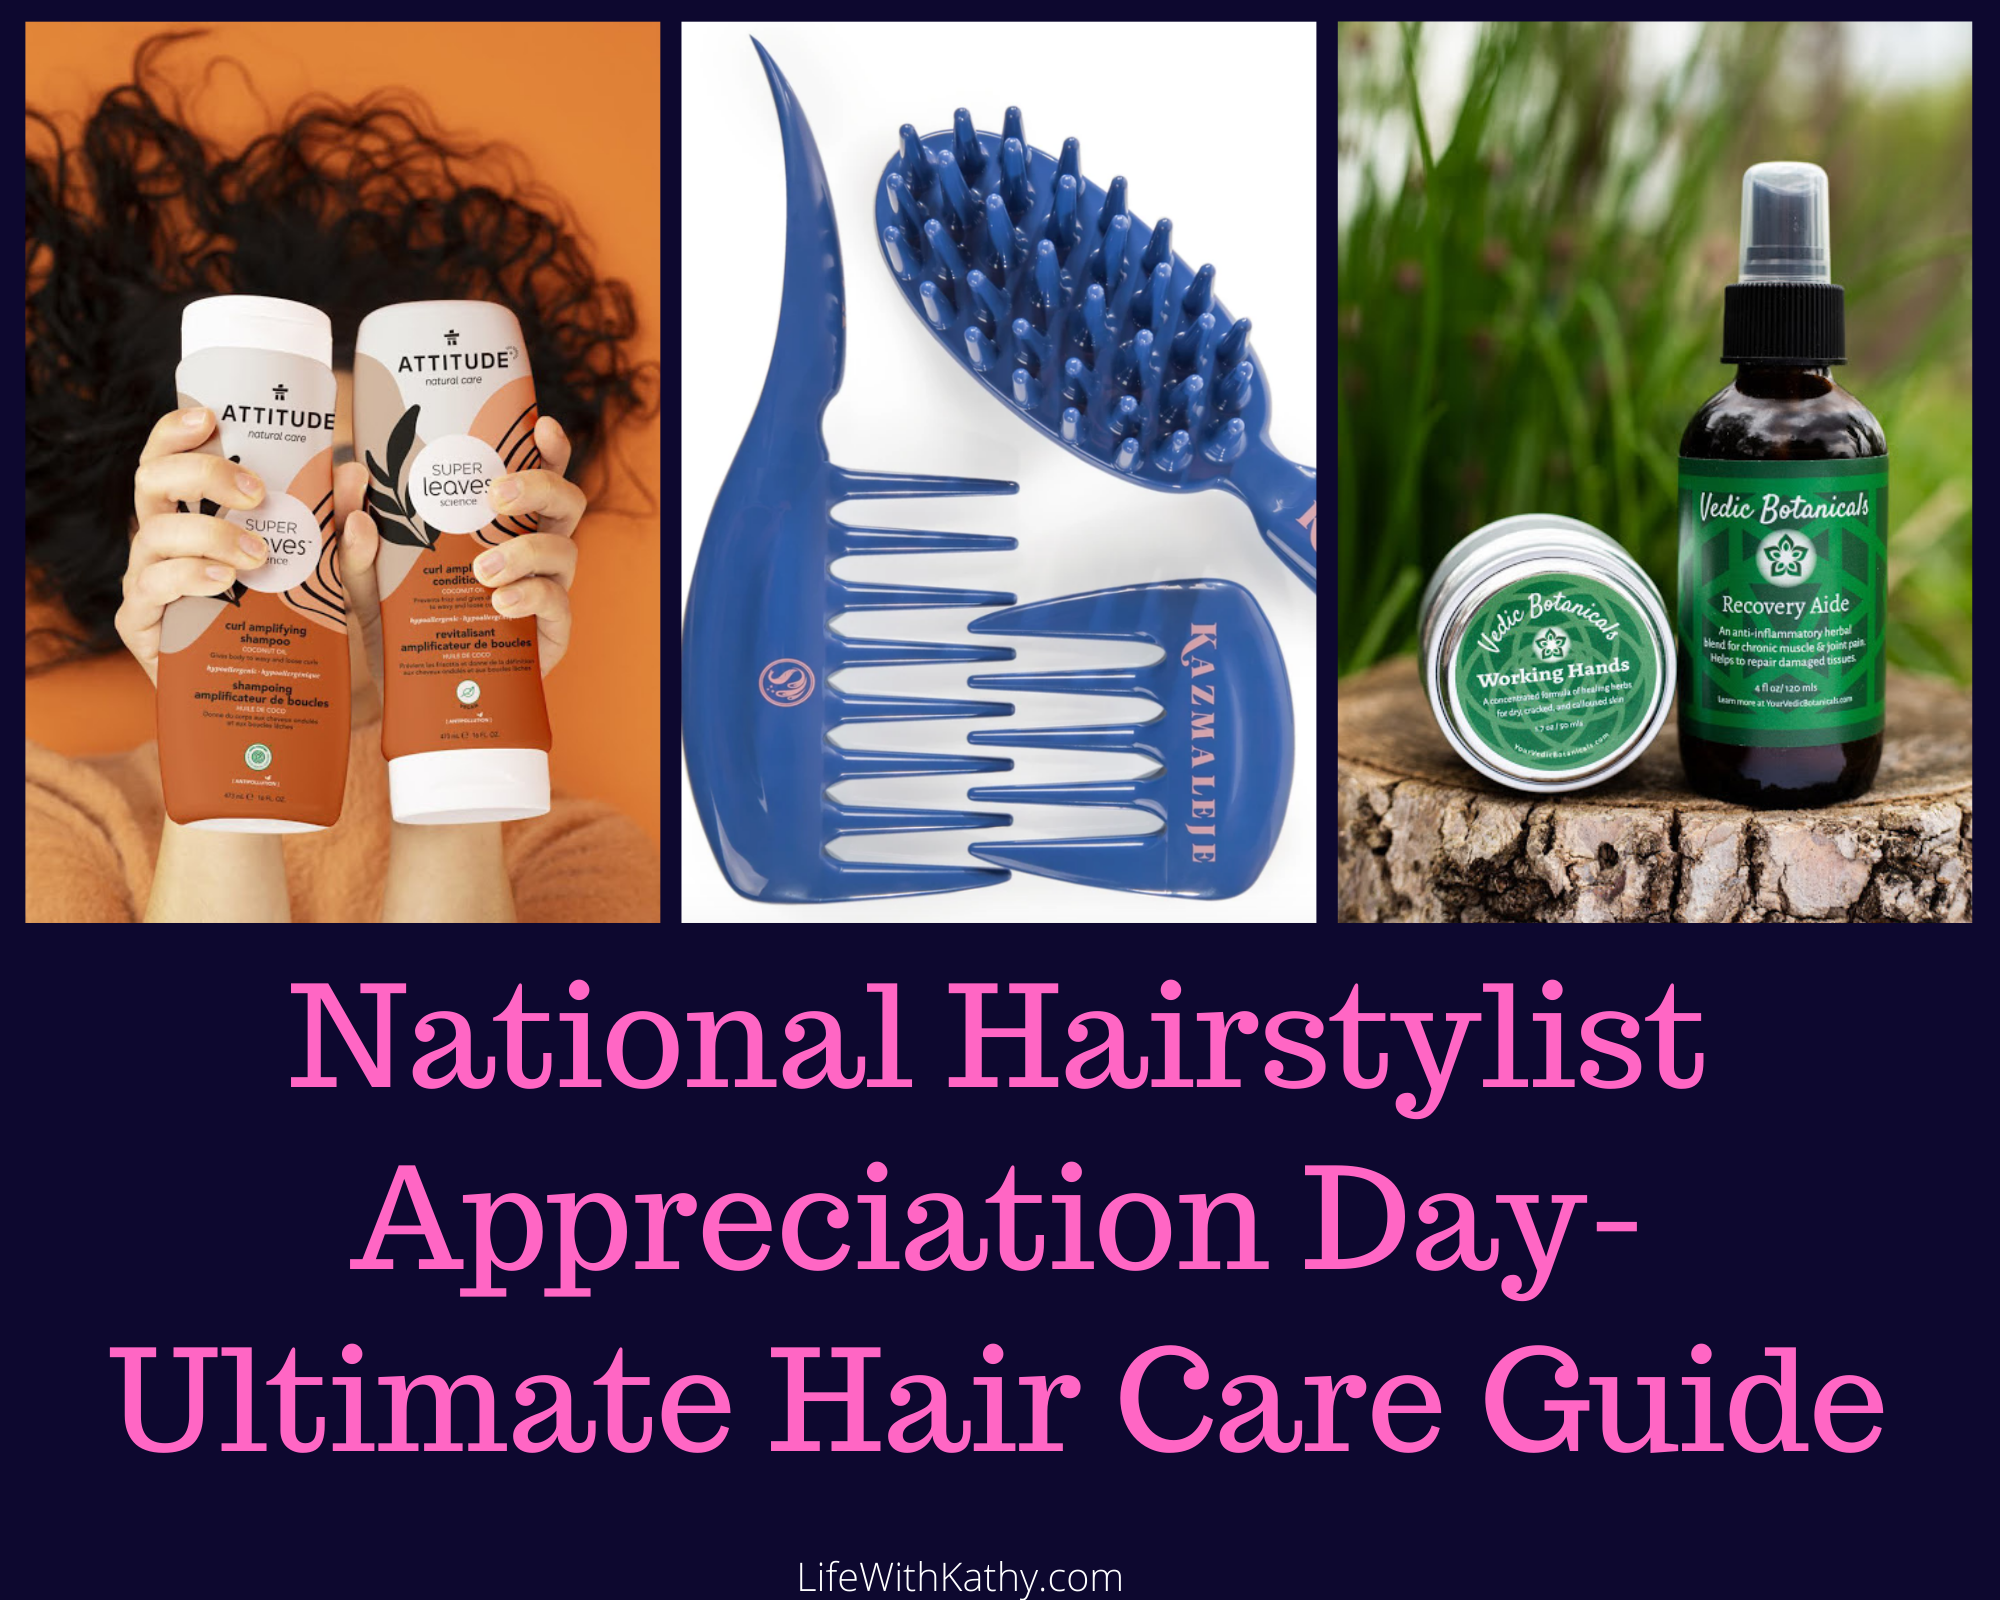 National Hairstylist Appreciation DayUltimate Hair Care Guide Life